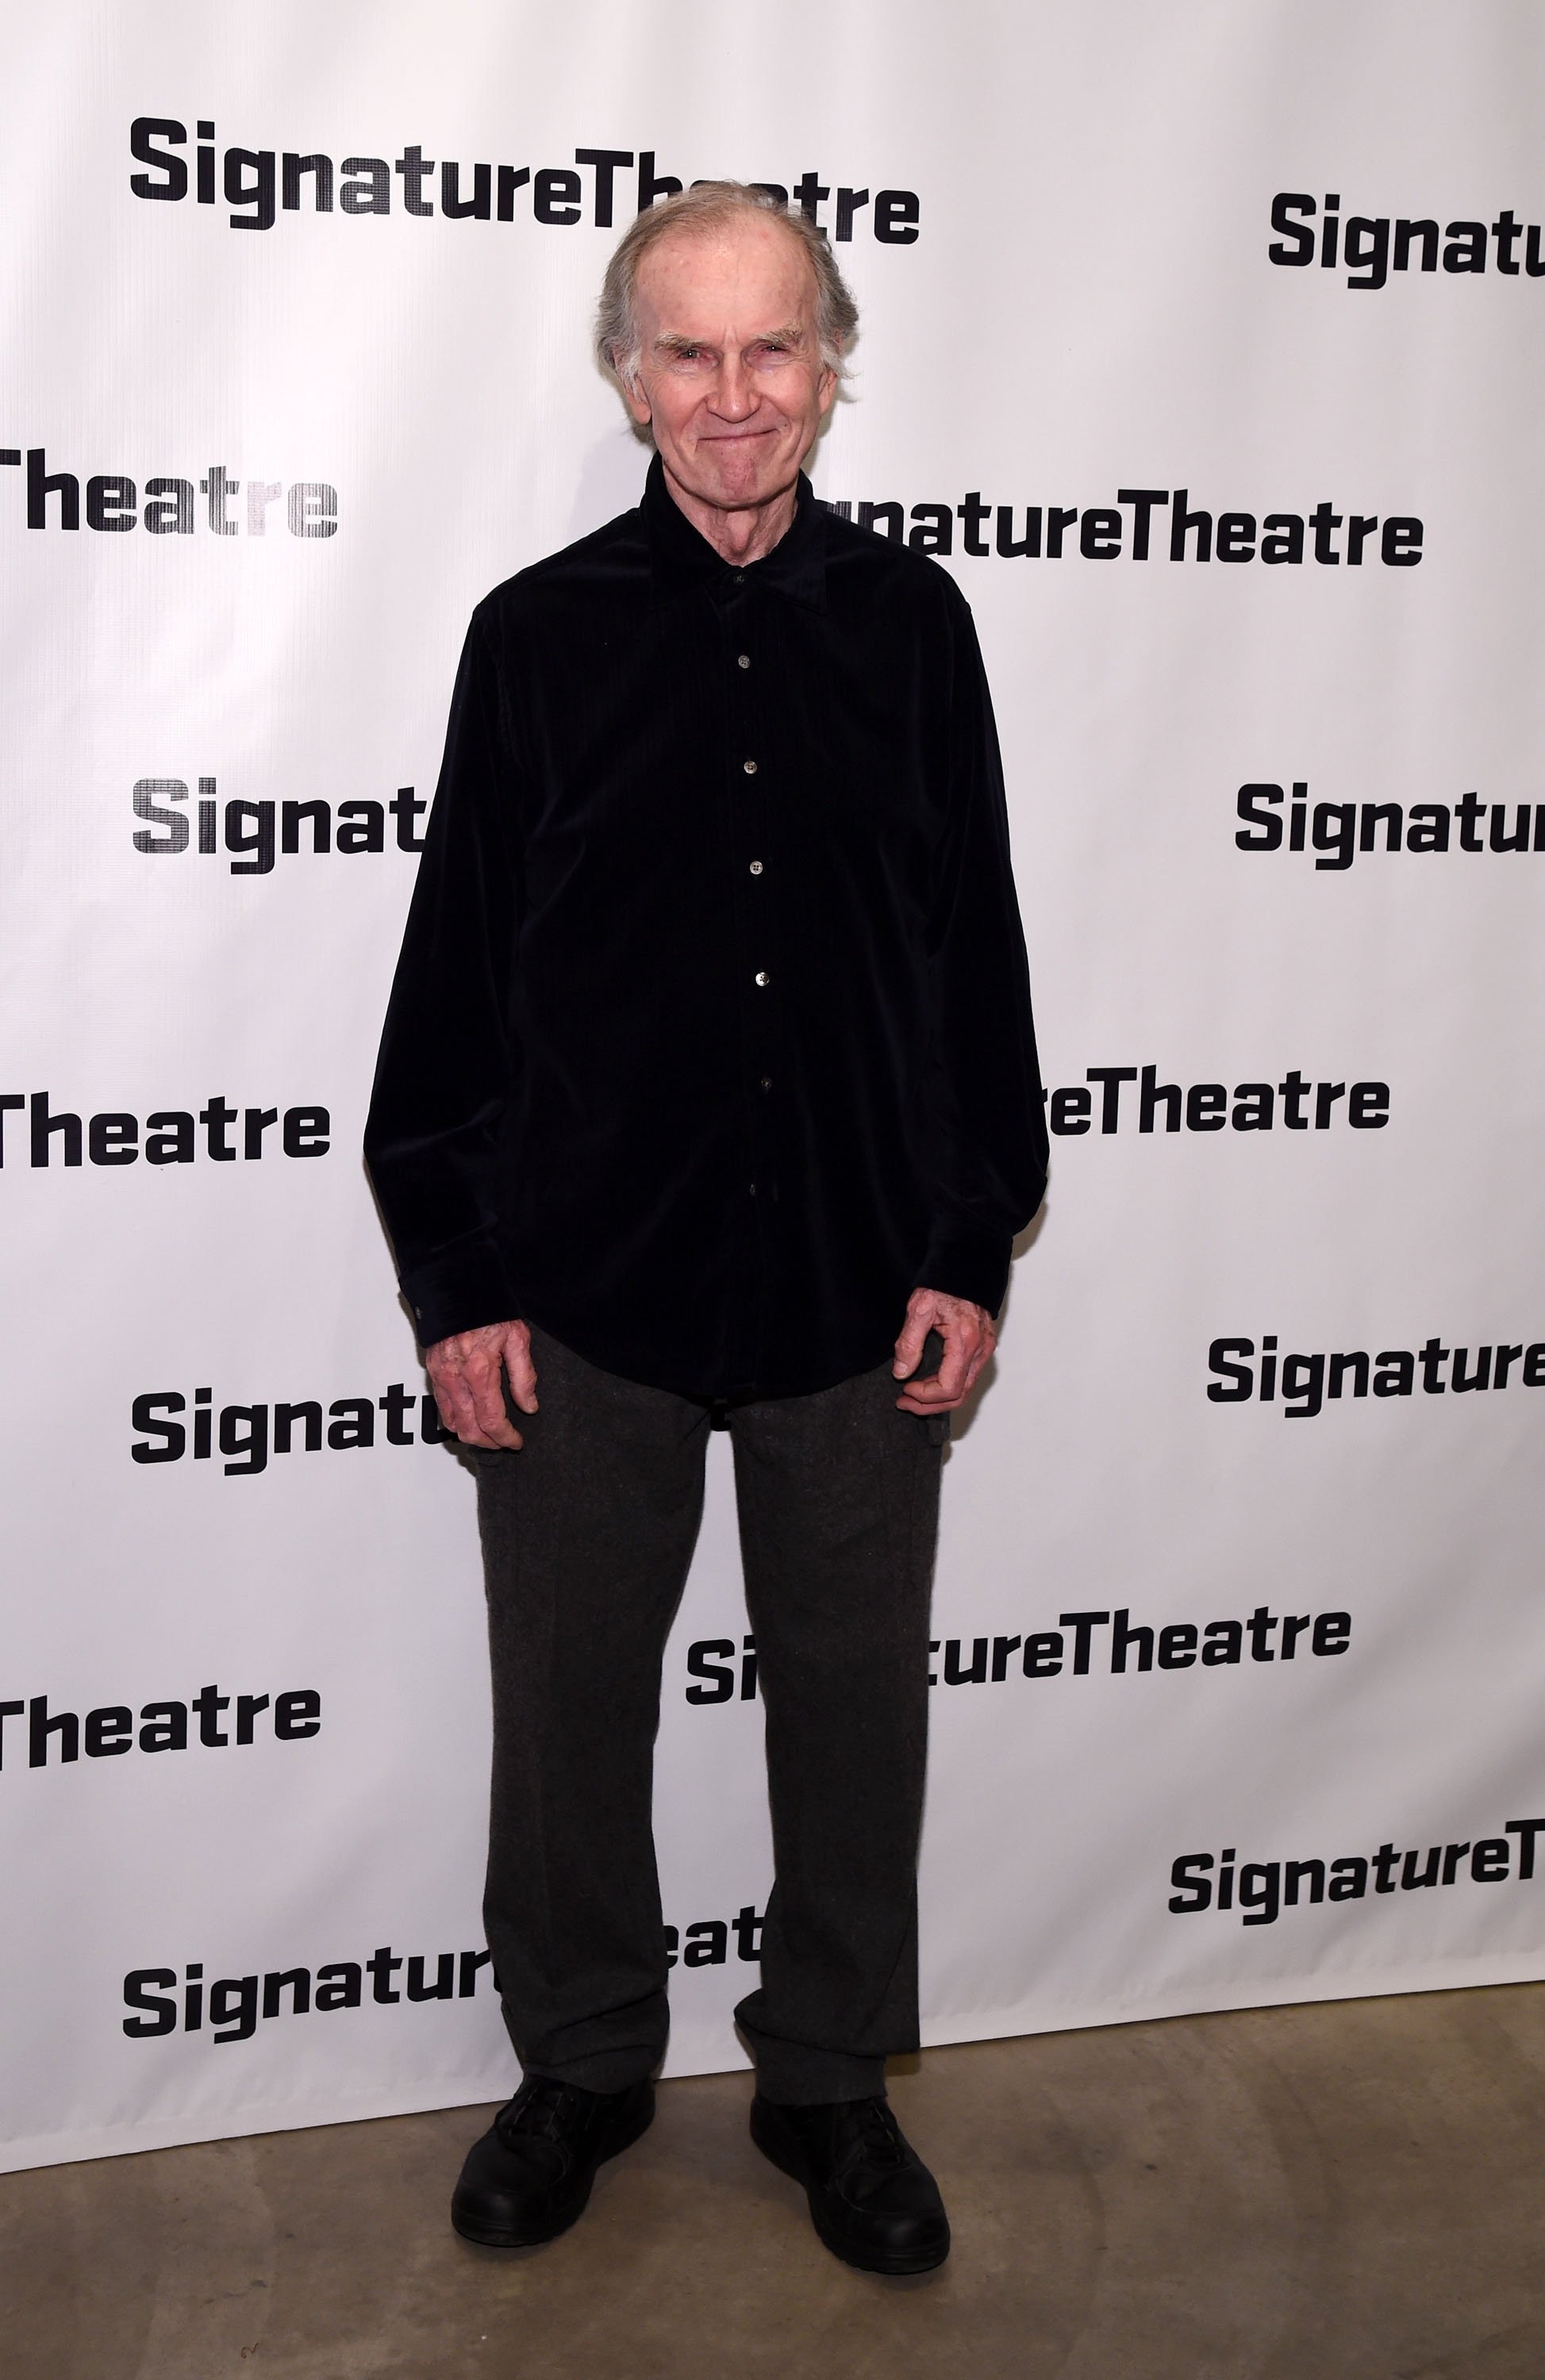 Robert Hogan im The Pershing Square Signature Center der Signature Theatre Company am 8. März 2015 in New York City. | Quelle: Getty Images